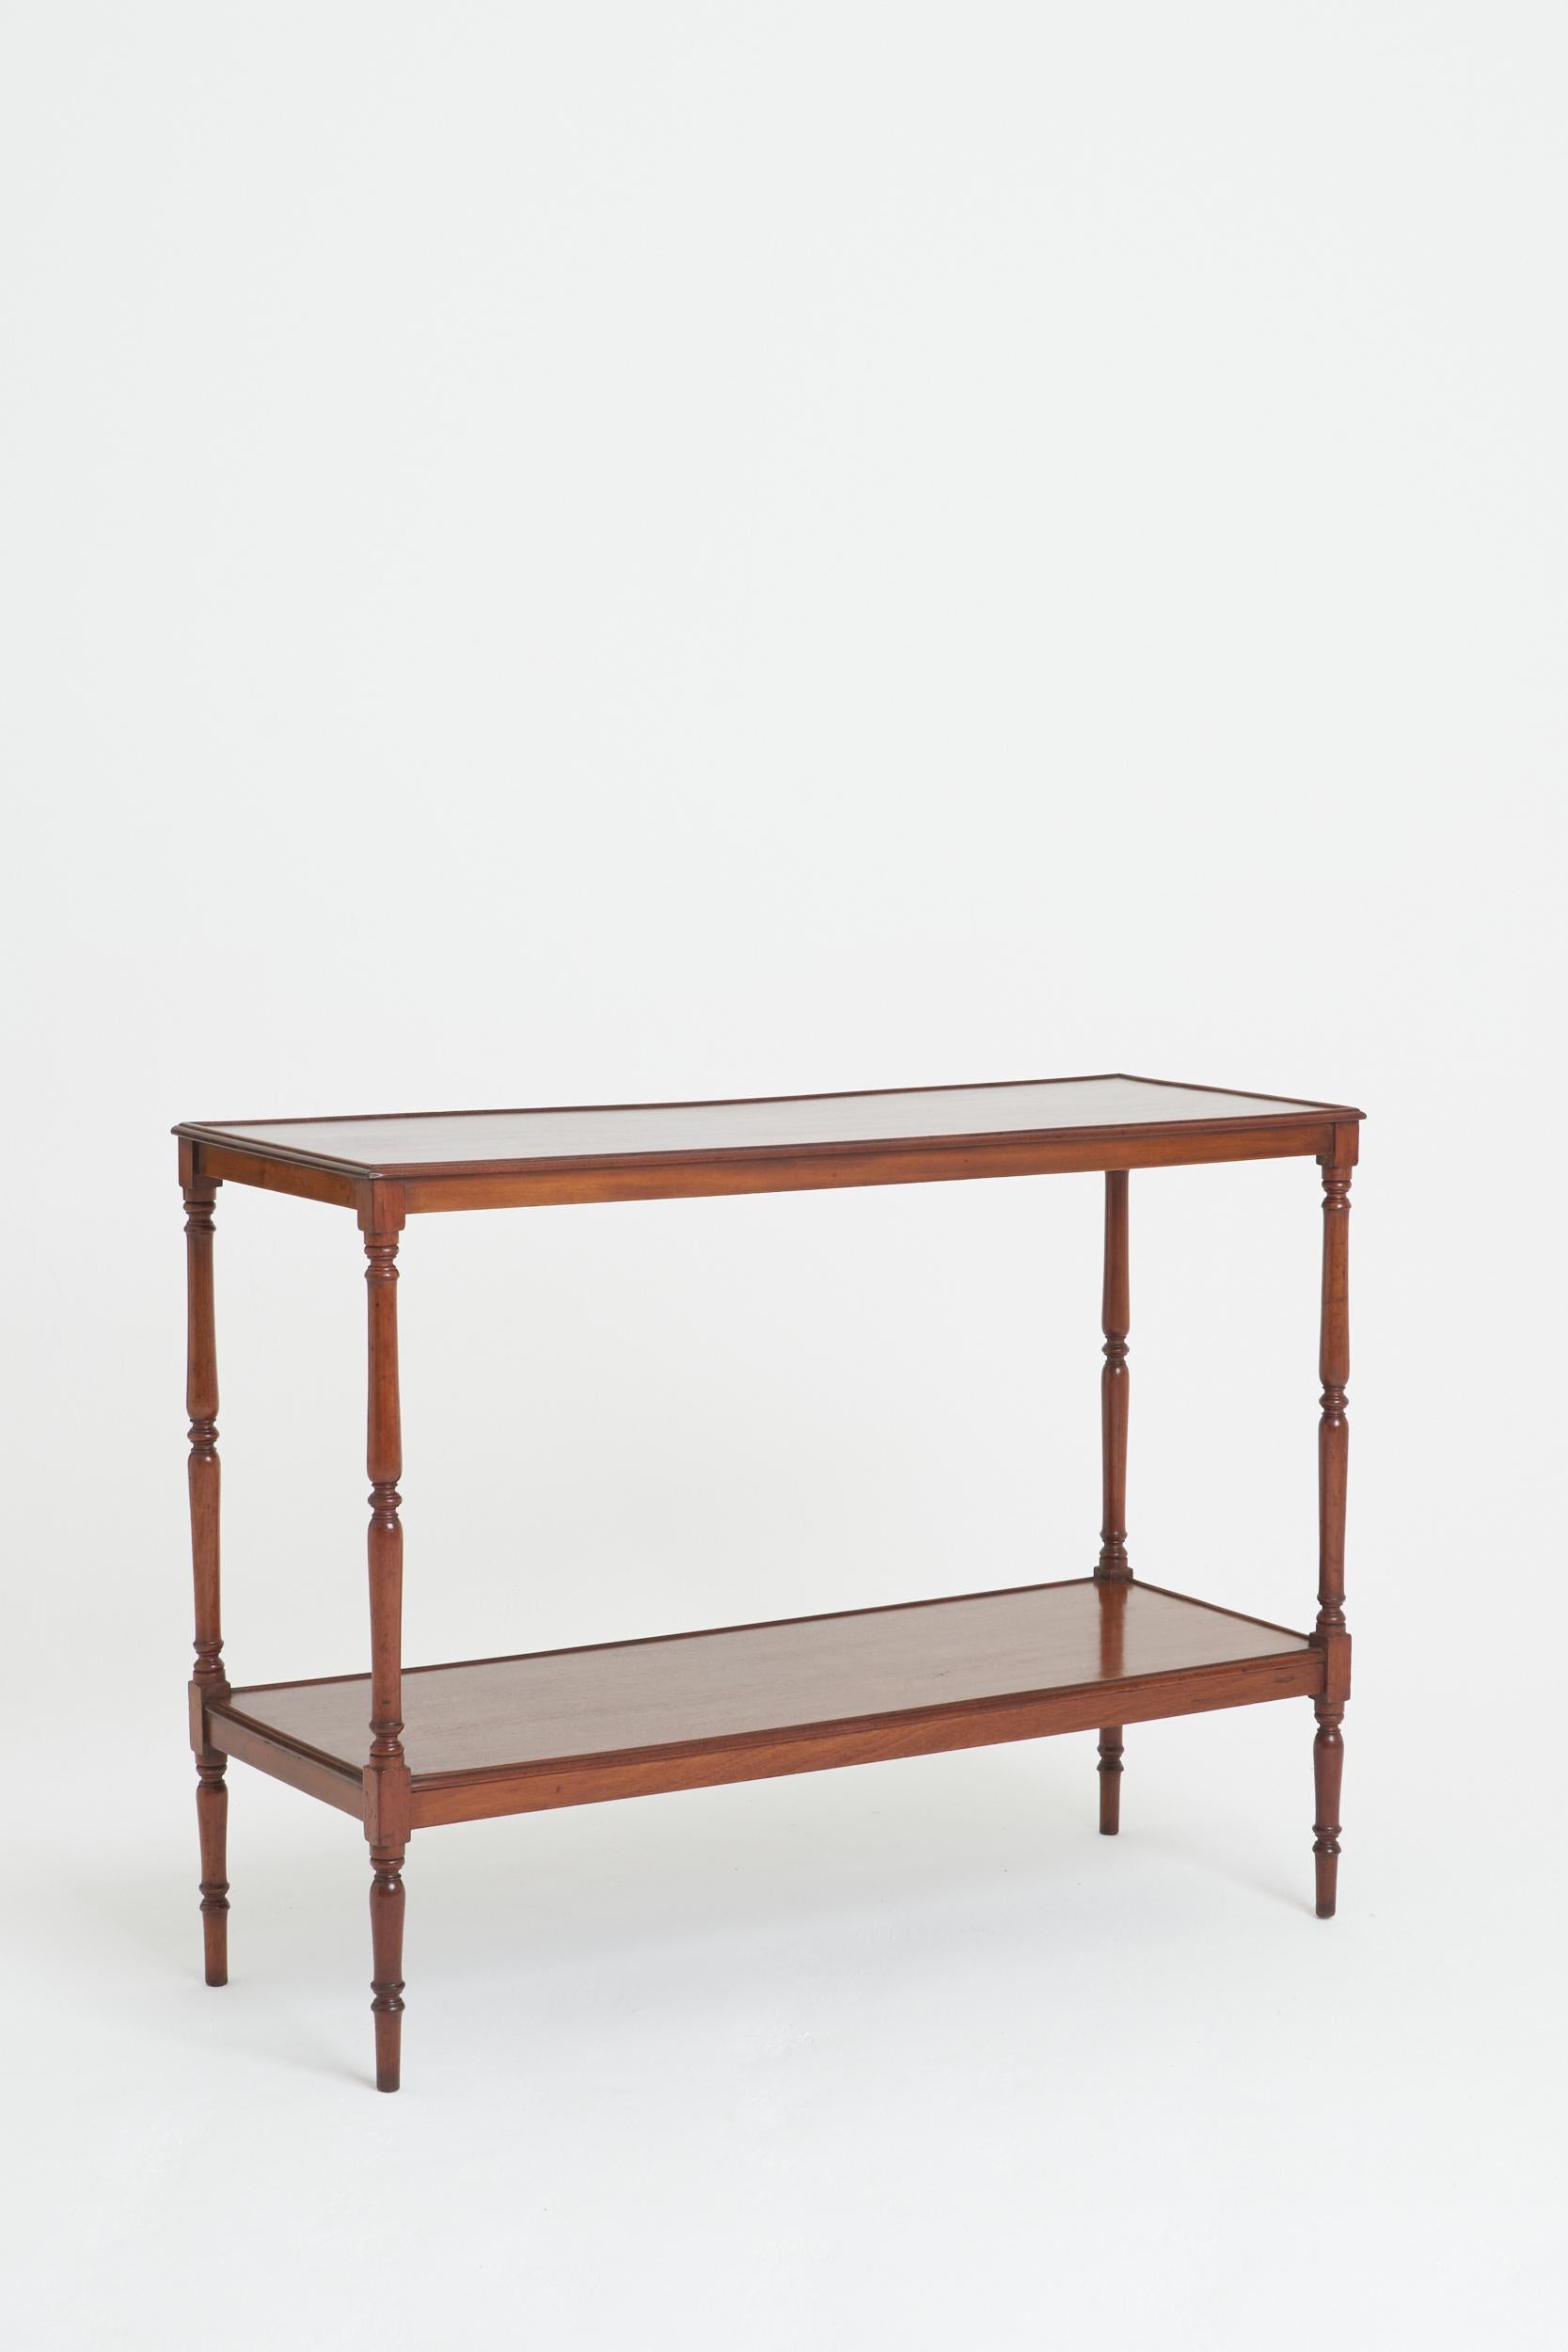 A two-tiered mahogany console table
France, second half of the 19th Century
90.5 cm high by 121 cm wide by 45 cm depth